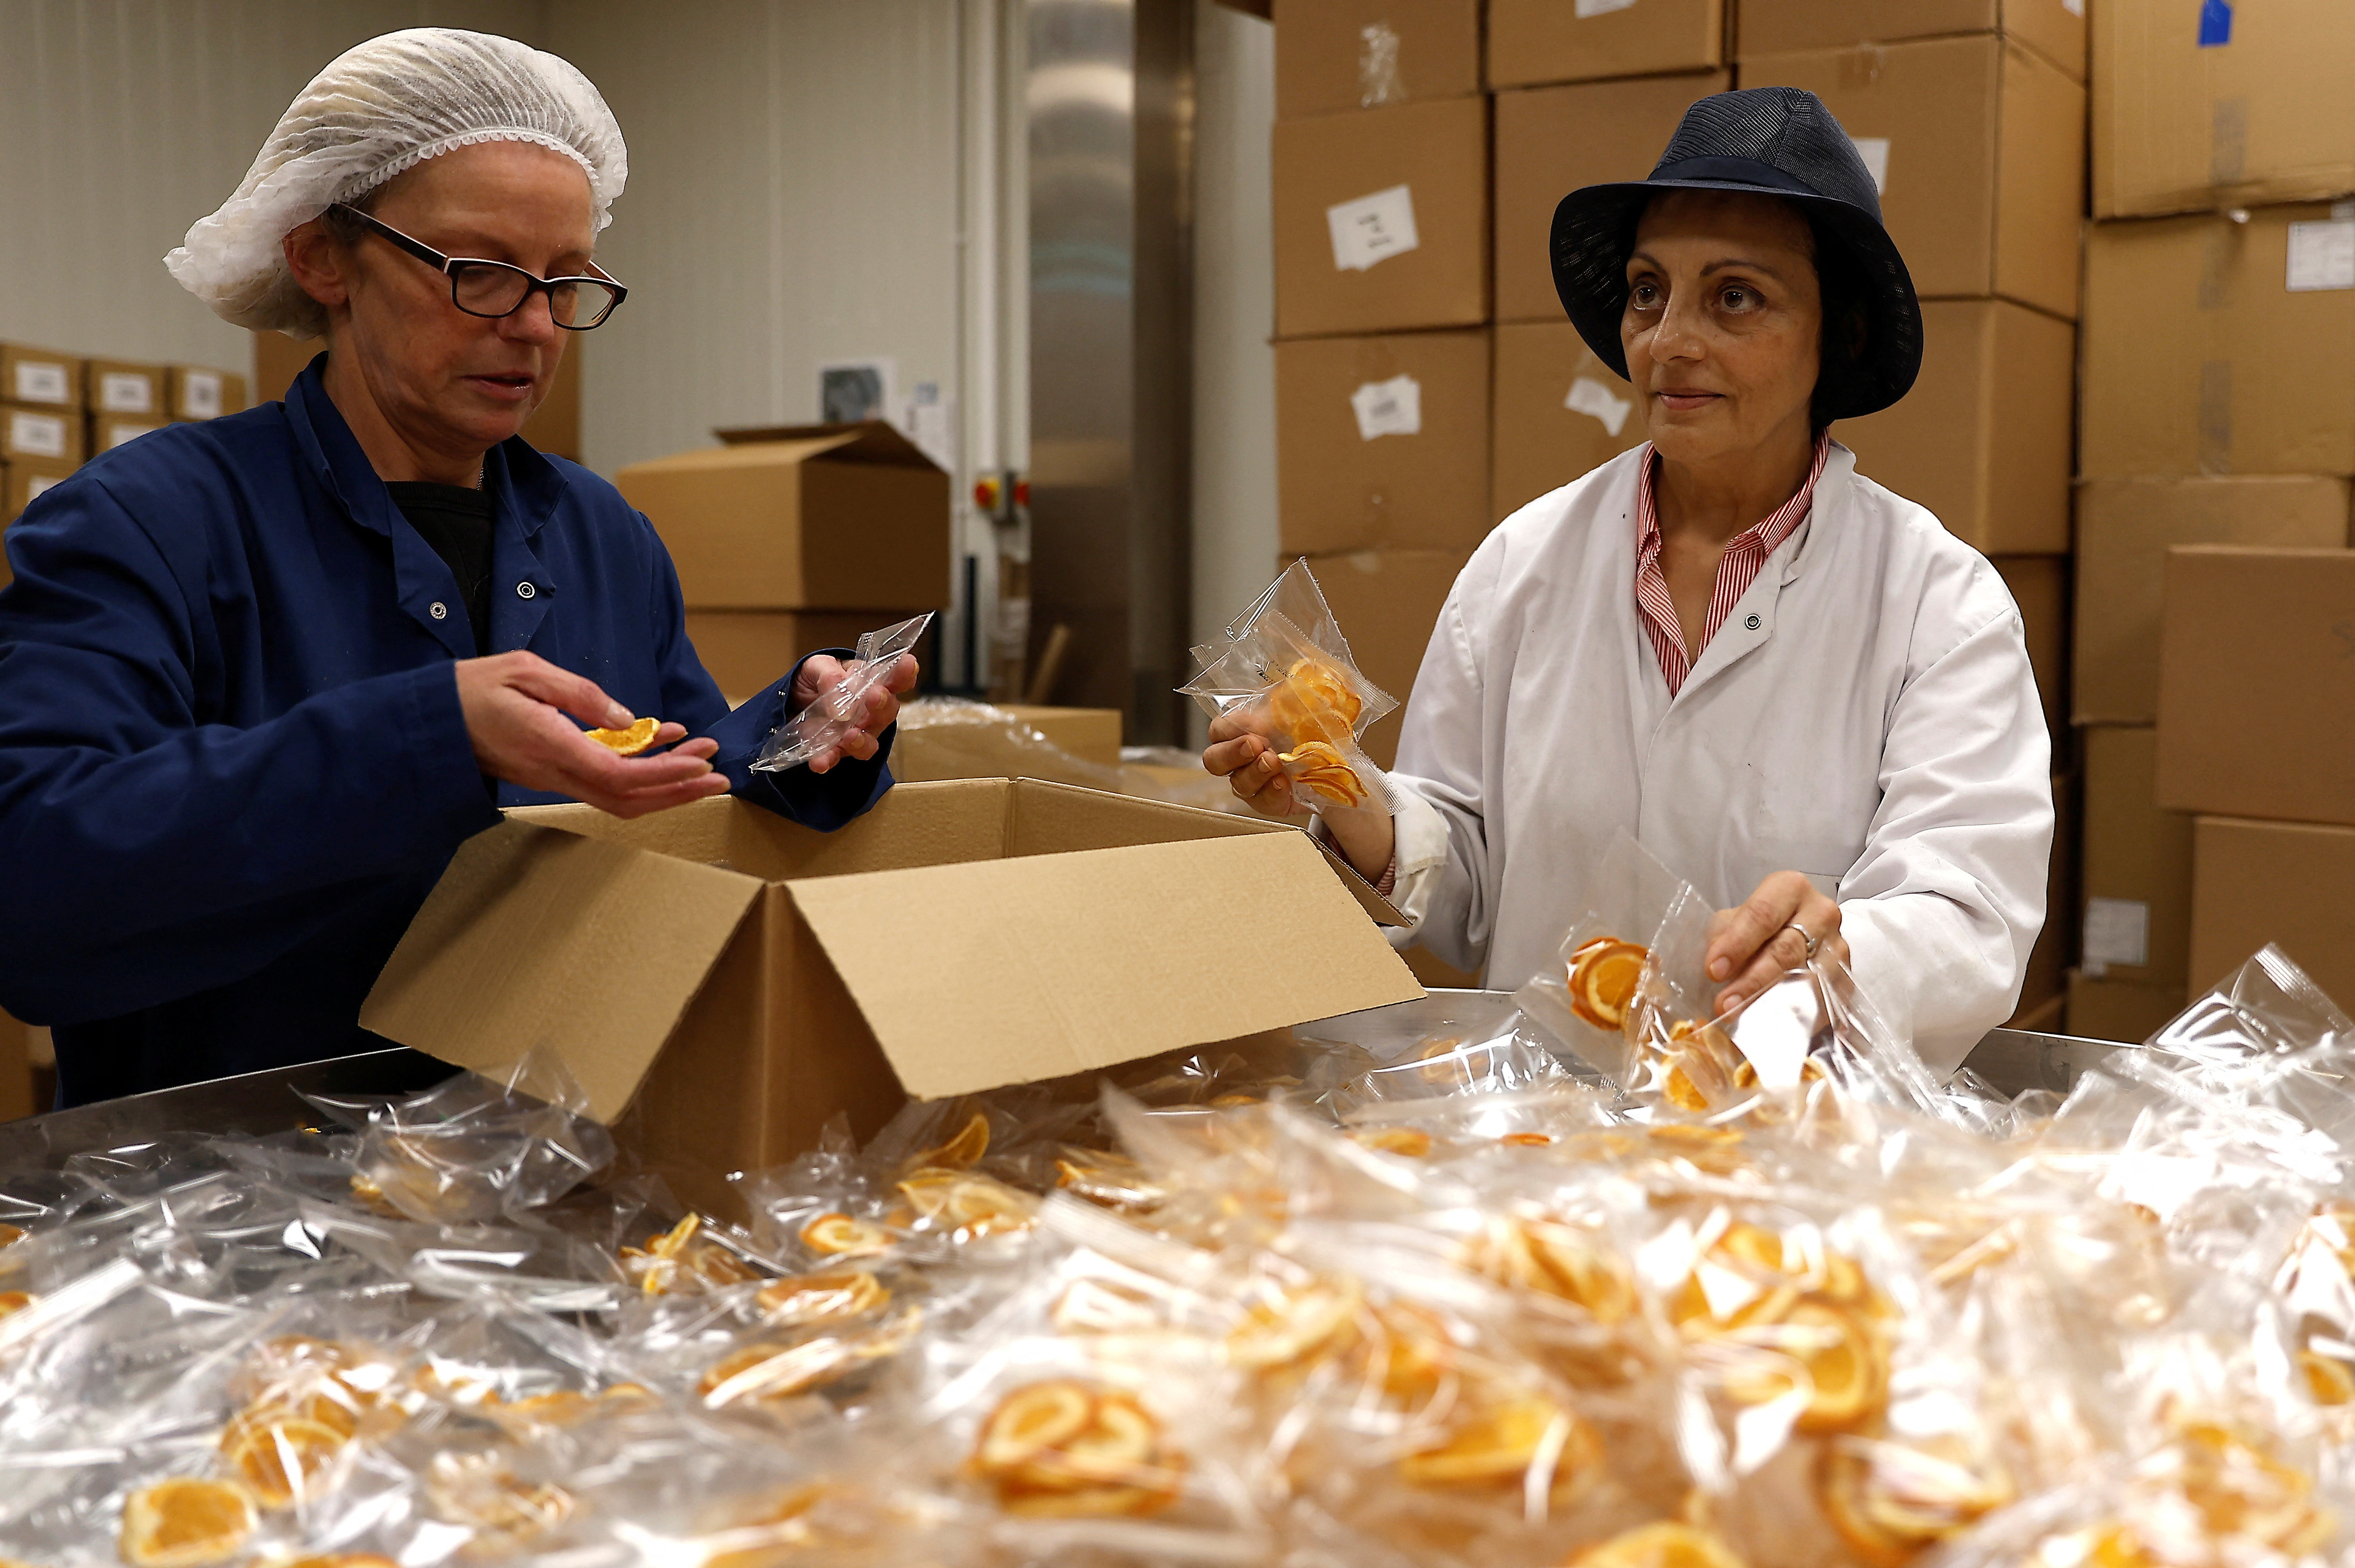 Founder and CEO of Nim's Fruit Crisps, Nimisha Raja, helps fellow workers pack dried oranges at her factory, in Sittingbourne